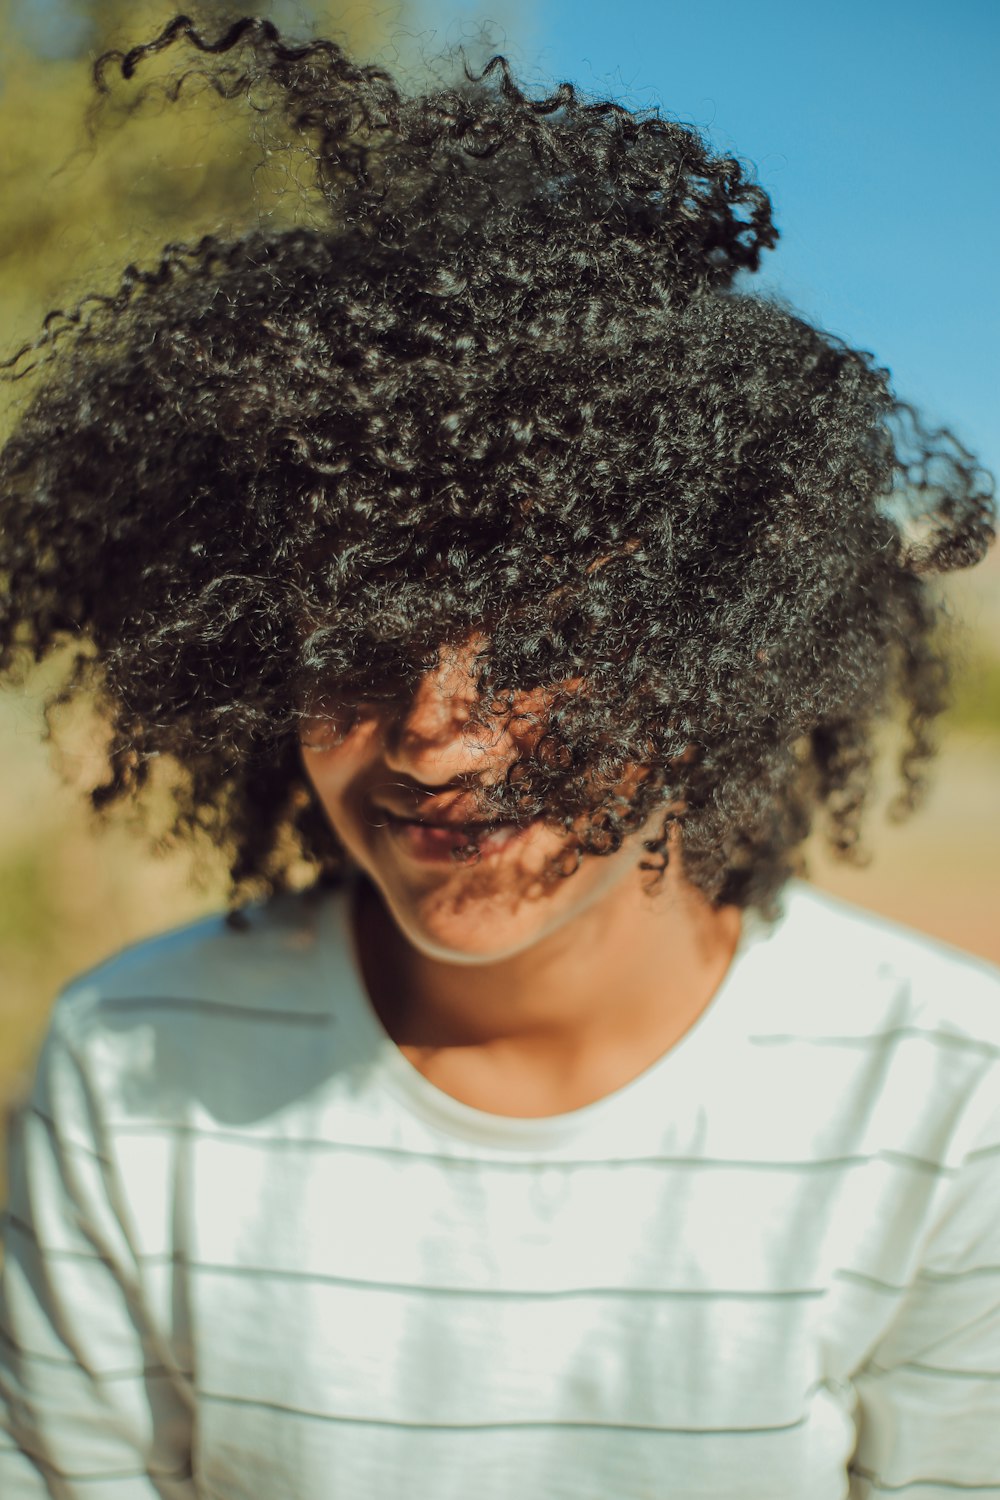 person wearing white crew-neck shirt with curly hair photo